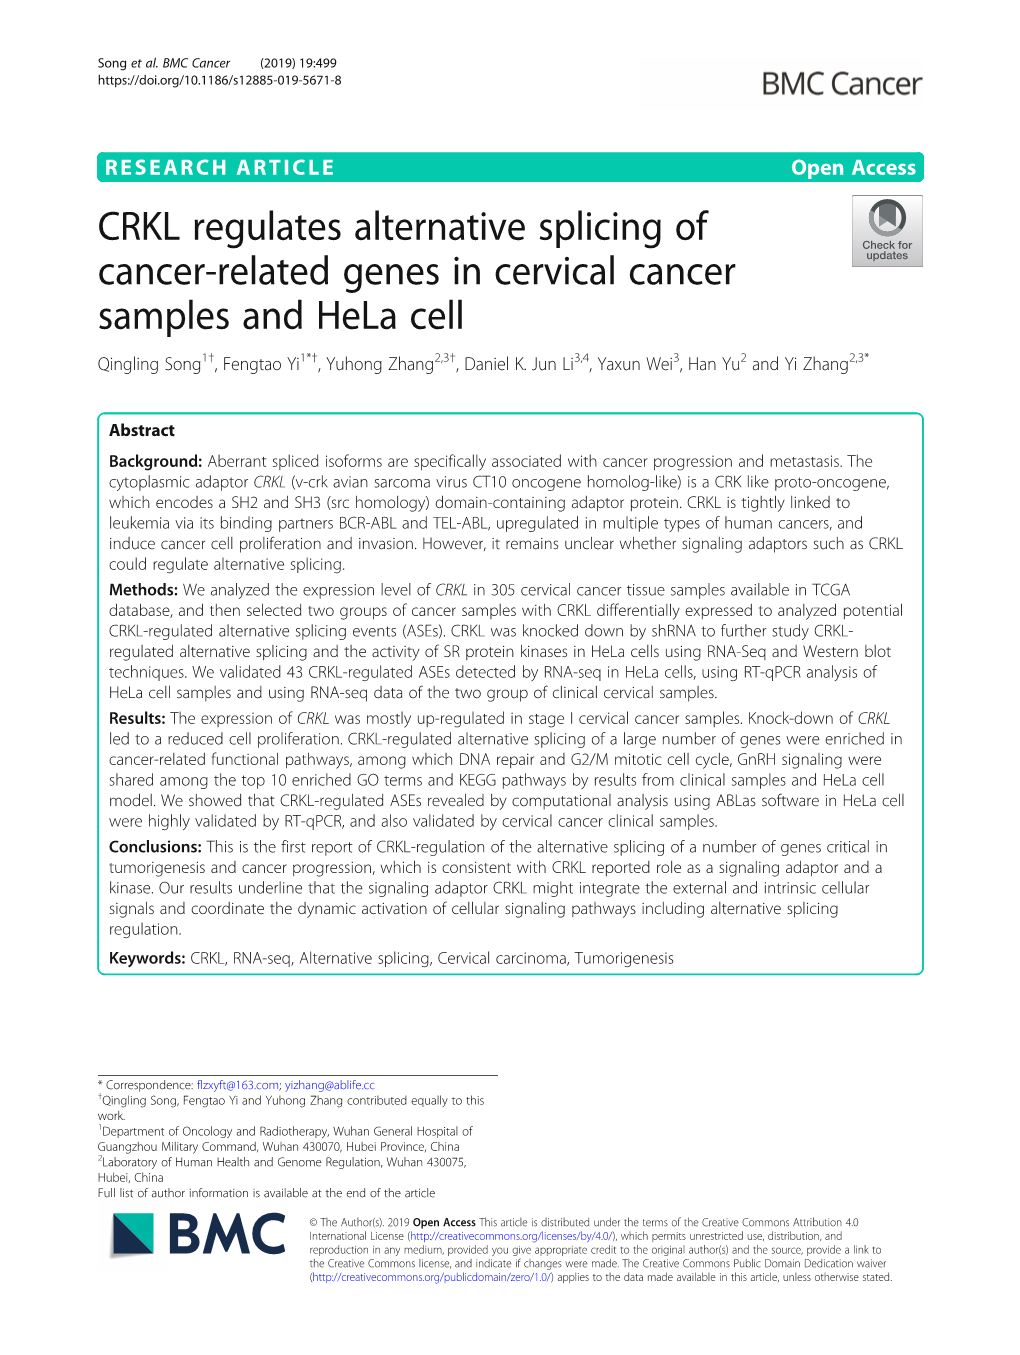 CRKL Regulates Alternative Splicing of Cancer-Related Genes in Cervical Cancer Samples and Hela Cell Qingling Song1†, Fengtao Yi1*†, Yuhong Zhang2,3†, Daniel K